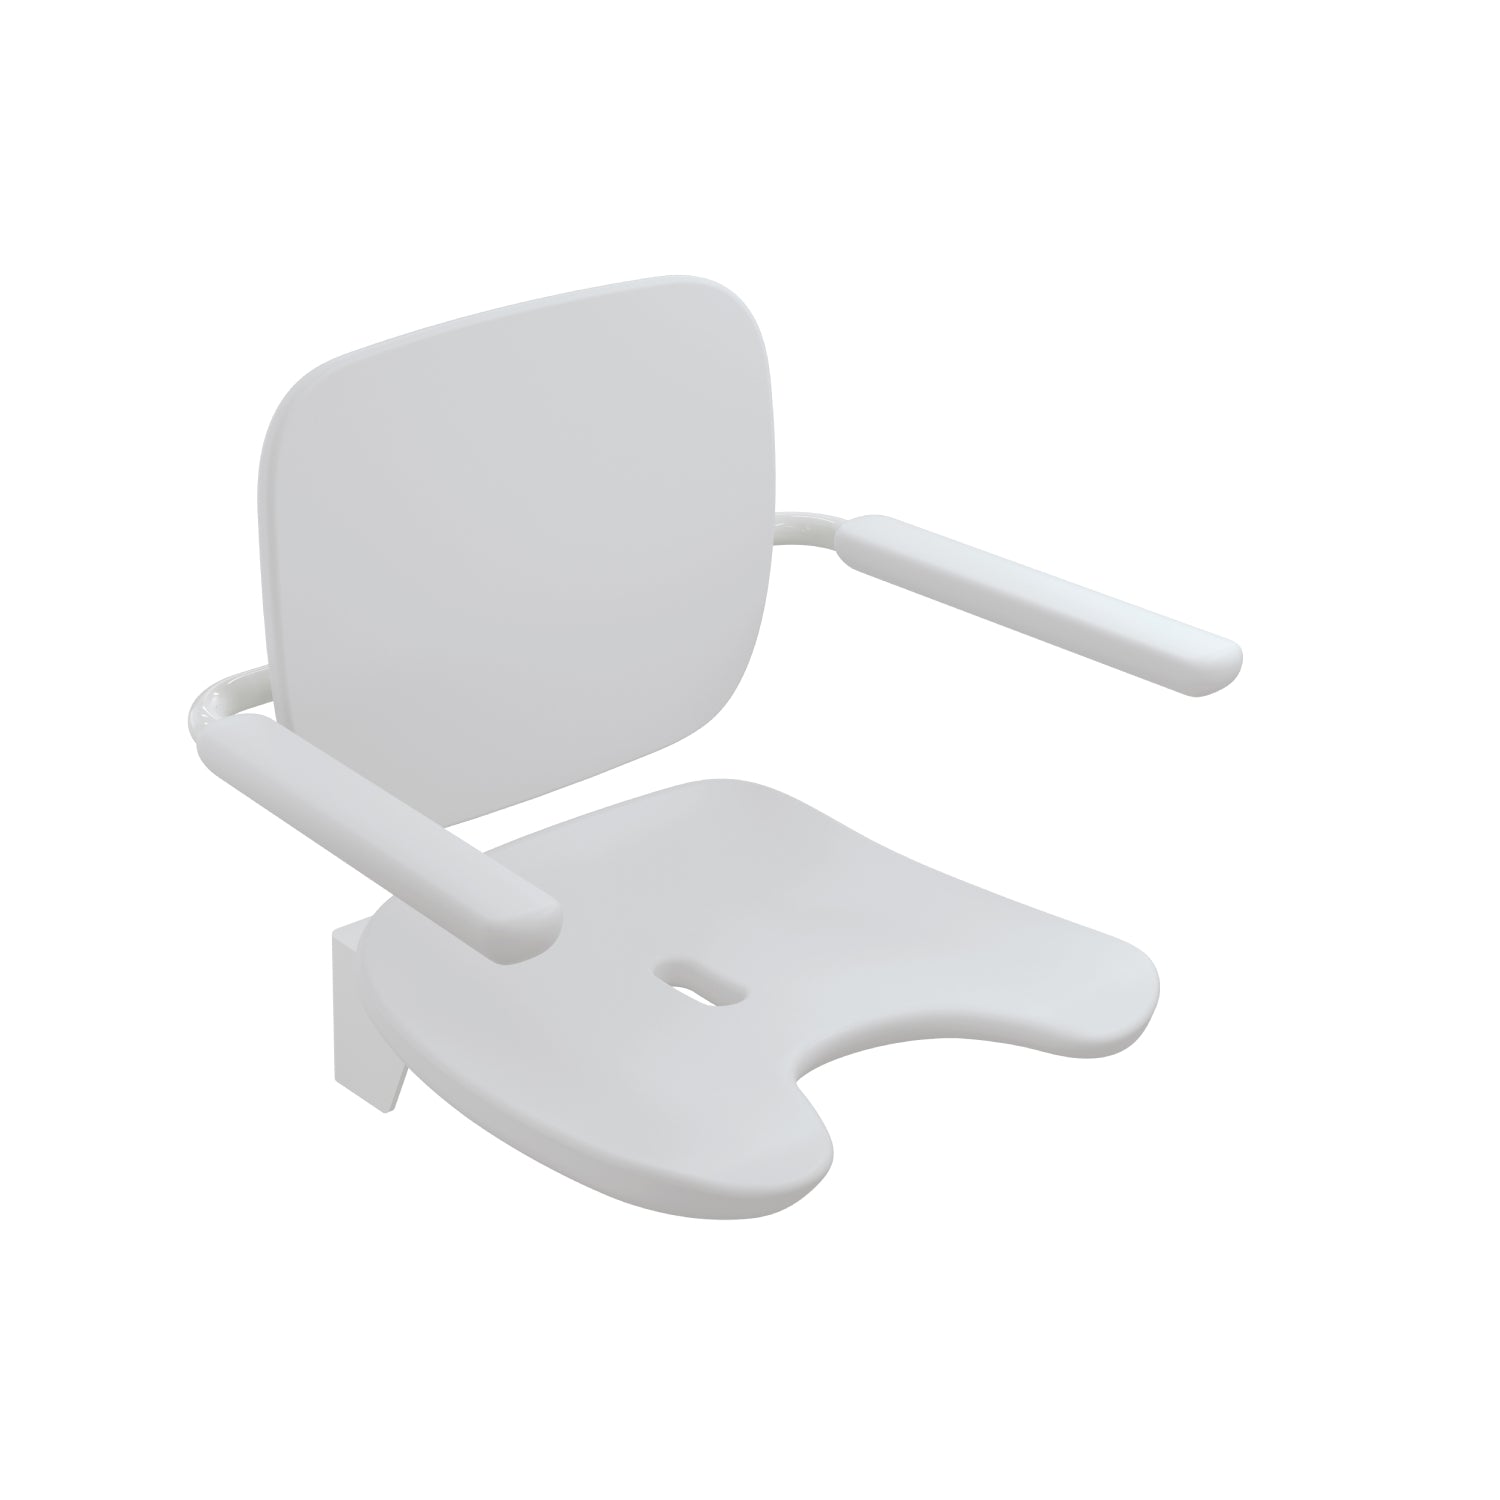 Desergo fixed seat with a white finish on a white background